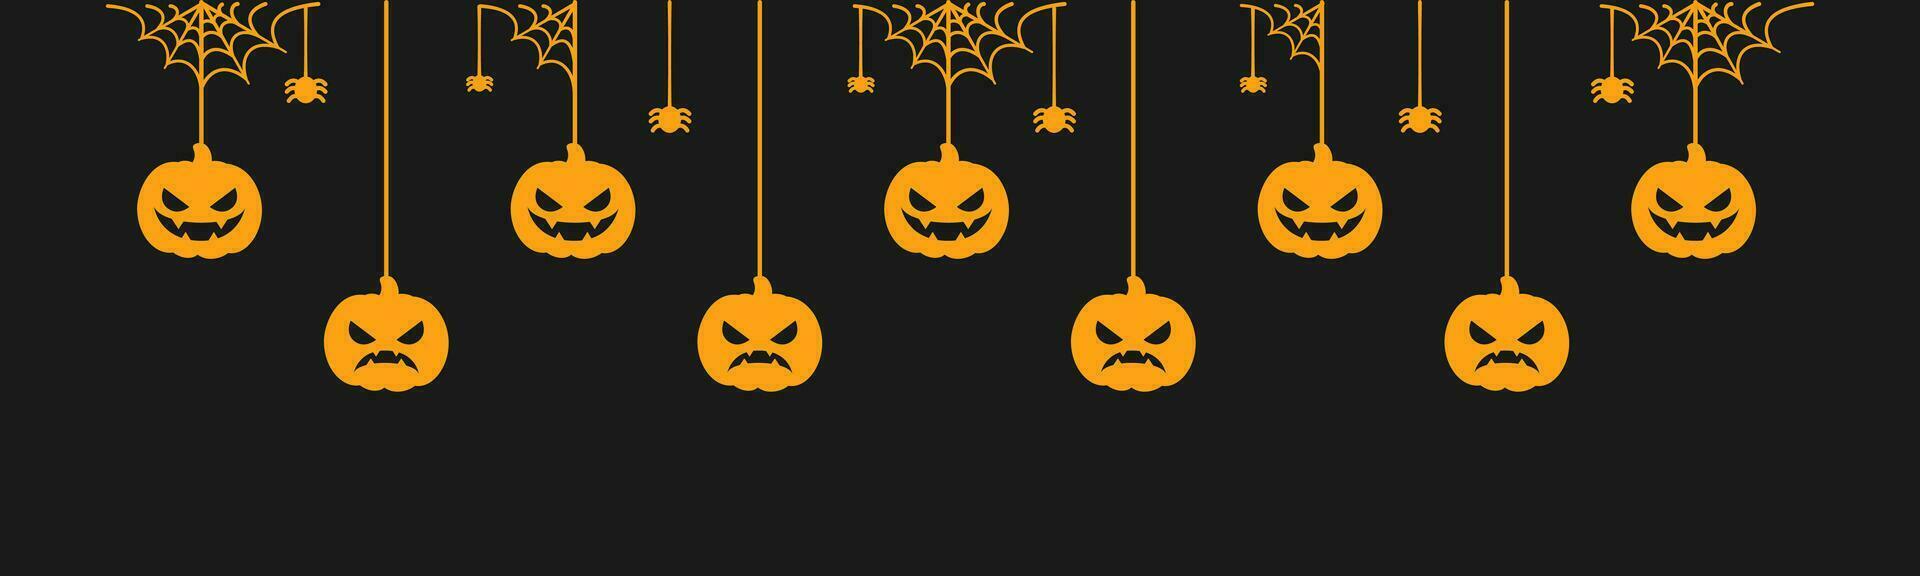 Happy Halloween banner or border with spider web and jack o lantern pumpkins silhouette. Hanging Spooky Ornaments Decoration Vector illustration, trick or treat party invitation